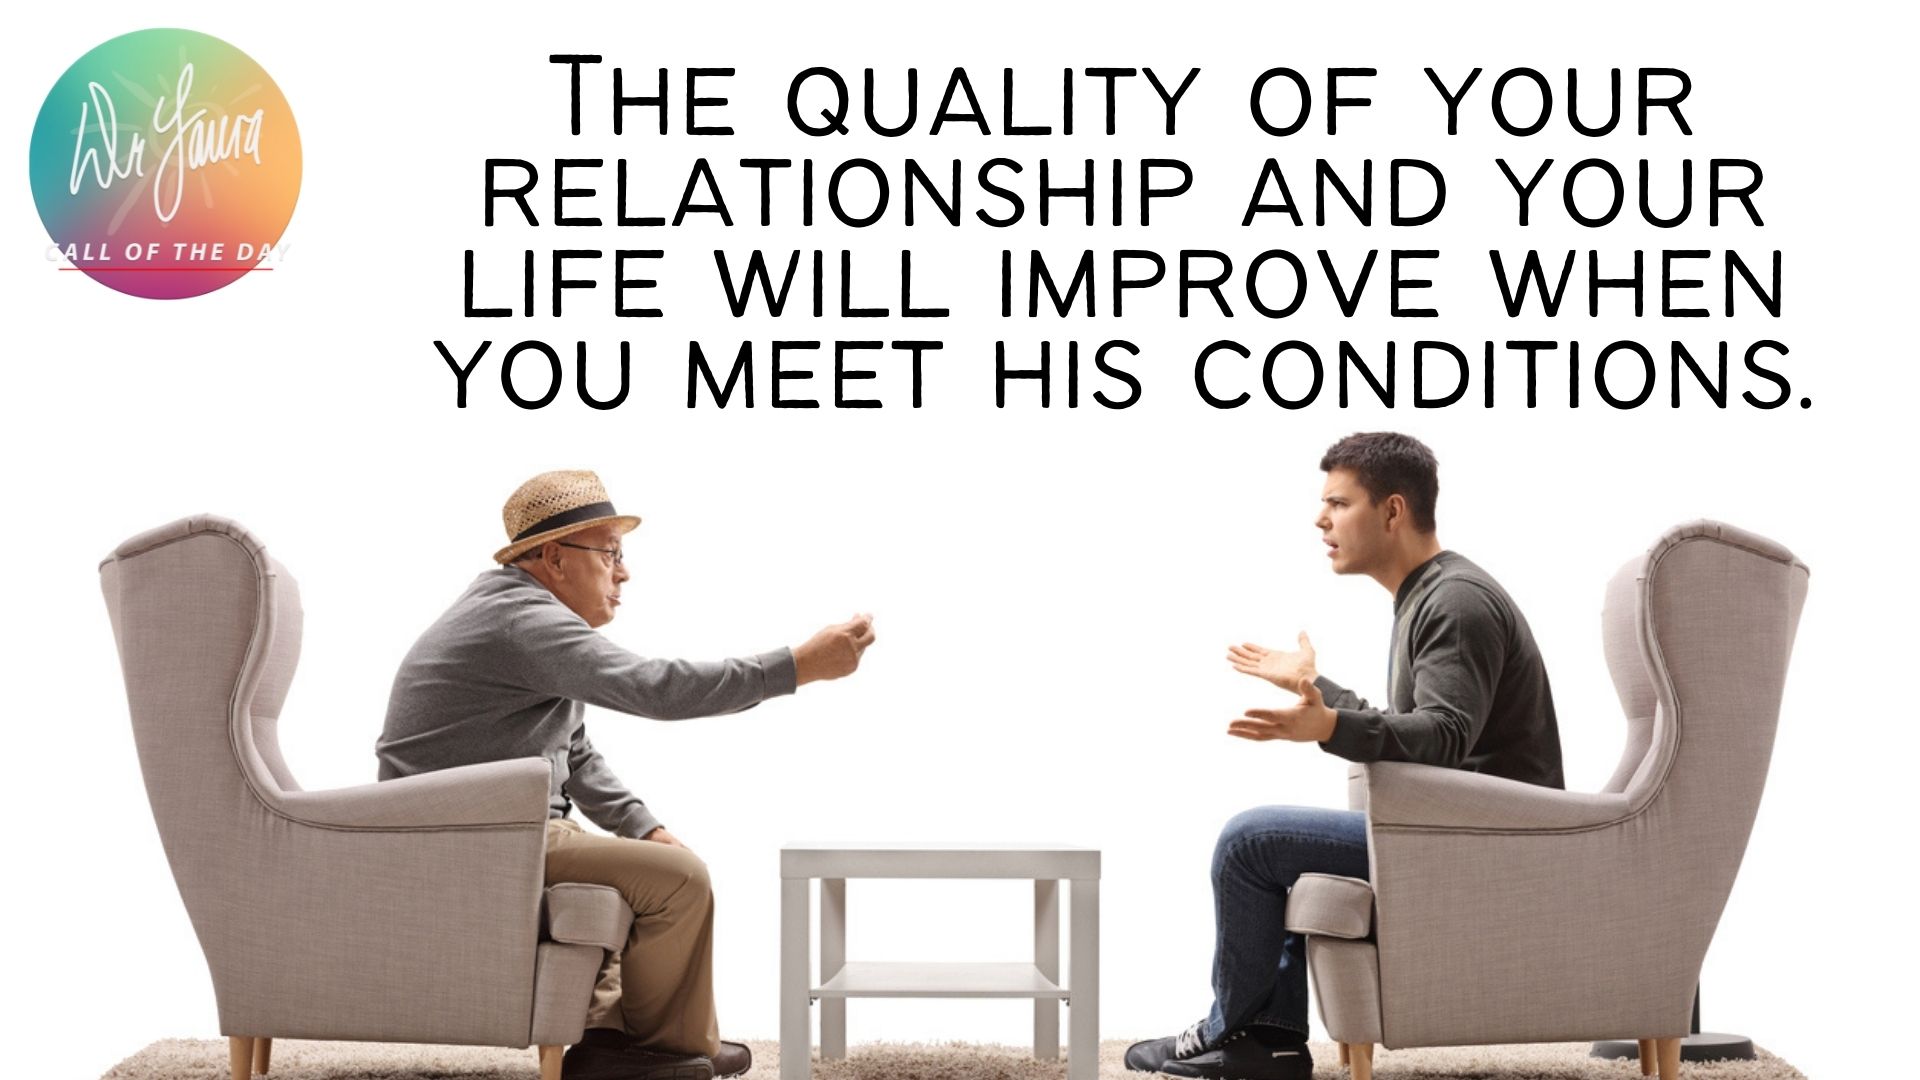 COTD Podcast: My Son is Putting Conditions on Our Relationship